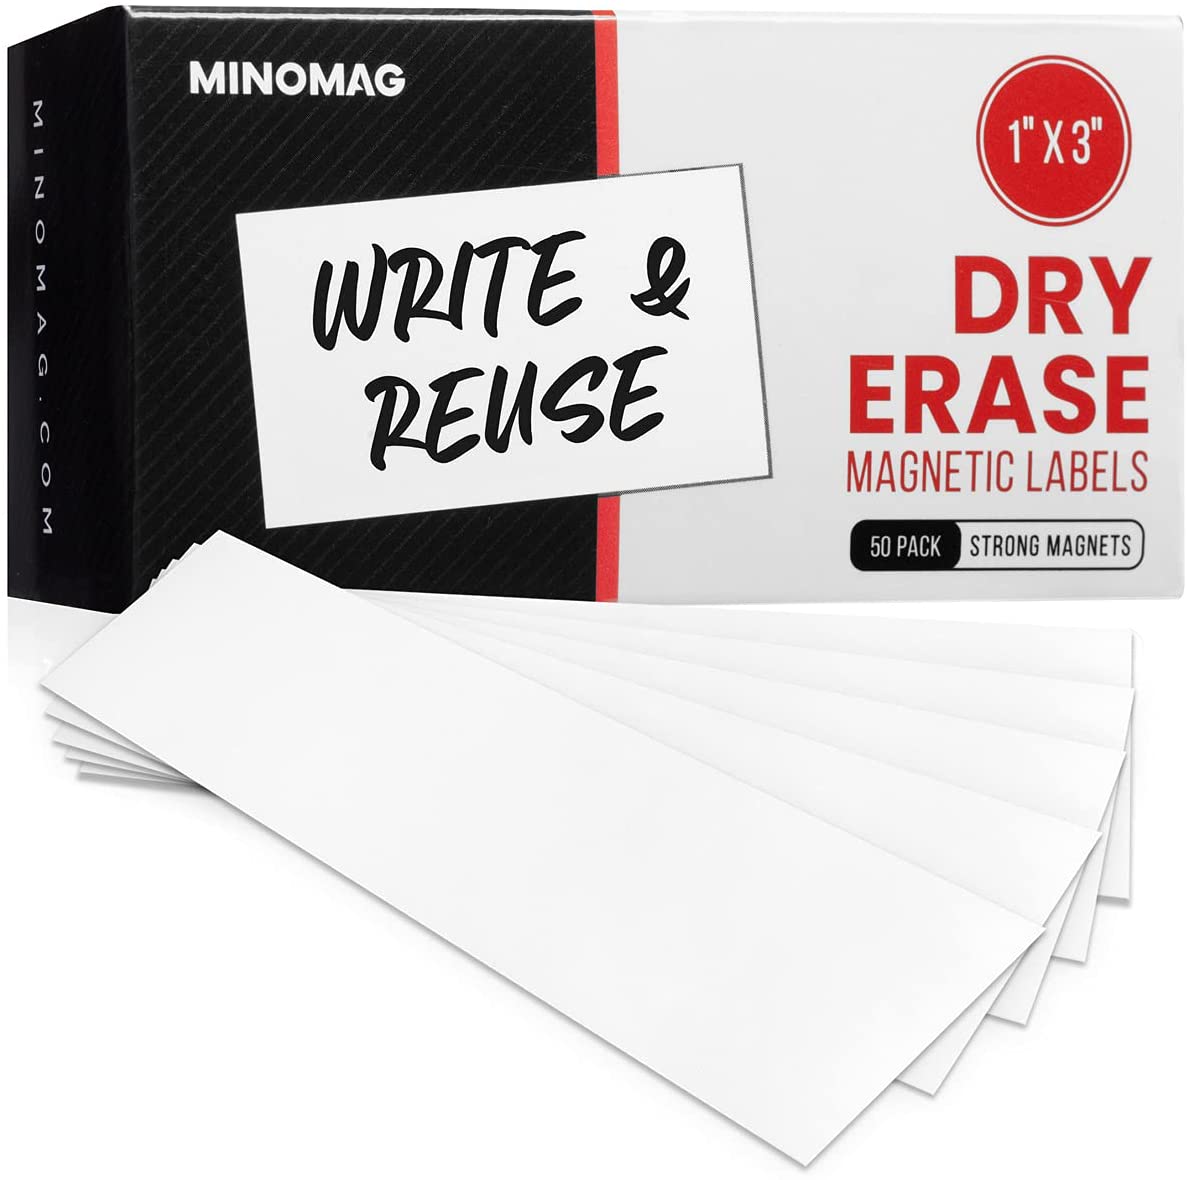 Minomag 2 x 10' Dry Erase Magnet Roll | Strong Magnetic Whiteboard Tape  Roll. Cut into Custom Label Strips and Sheets for Fridge or White Board, 2